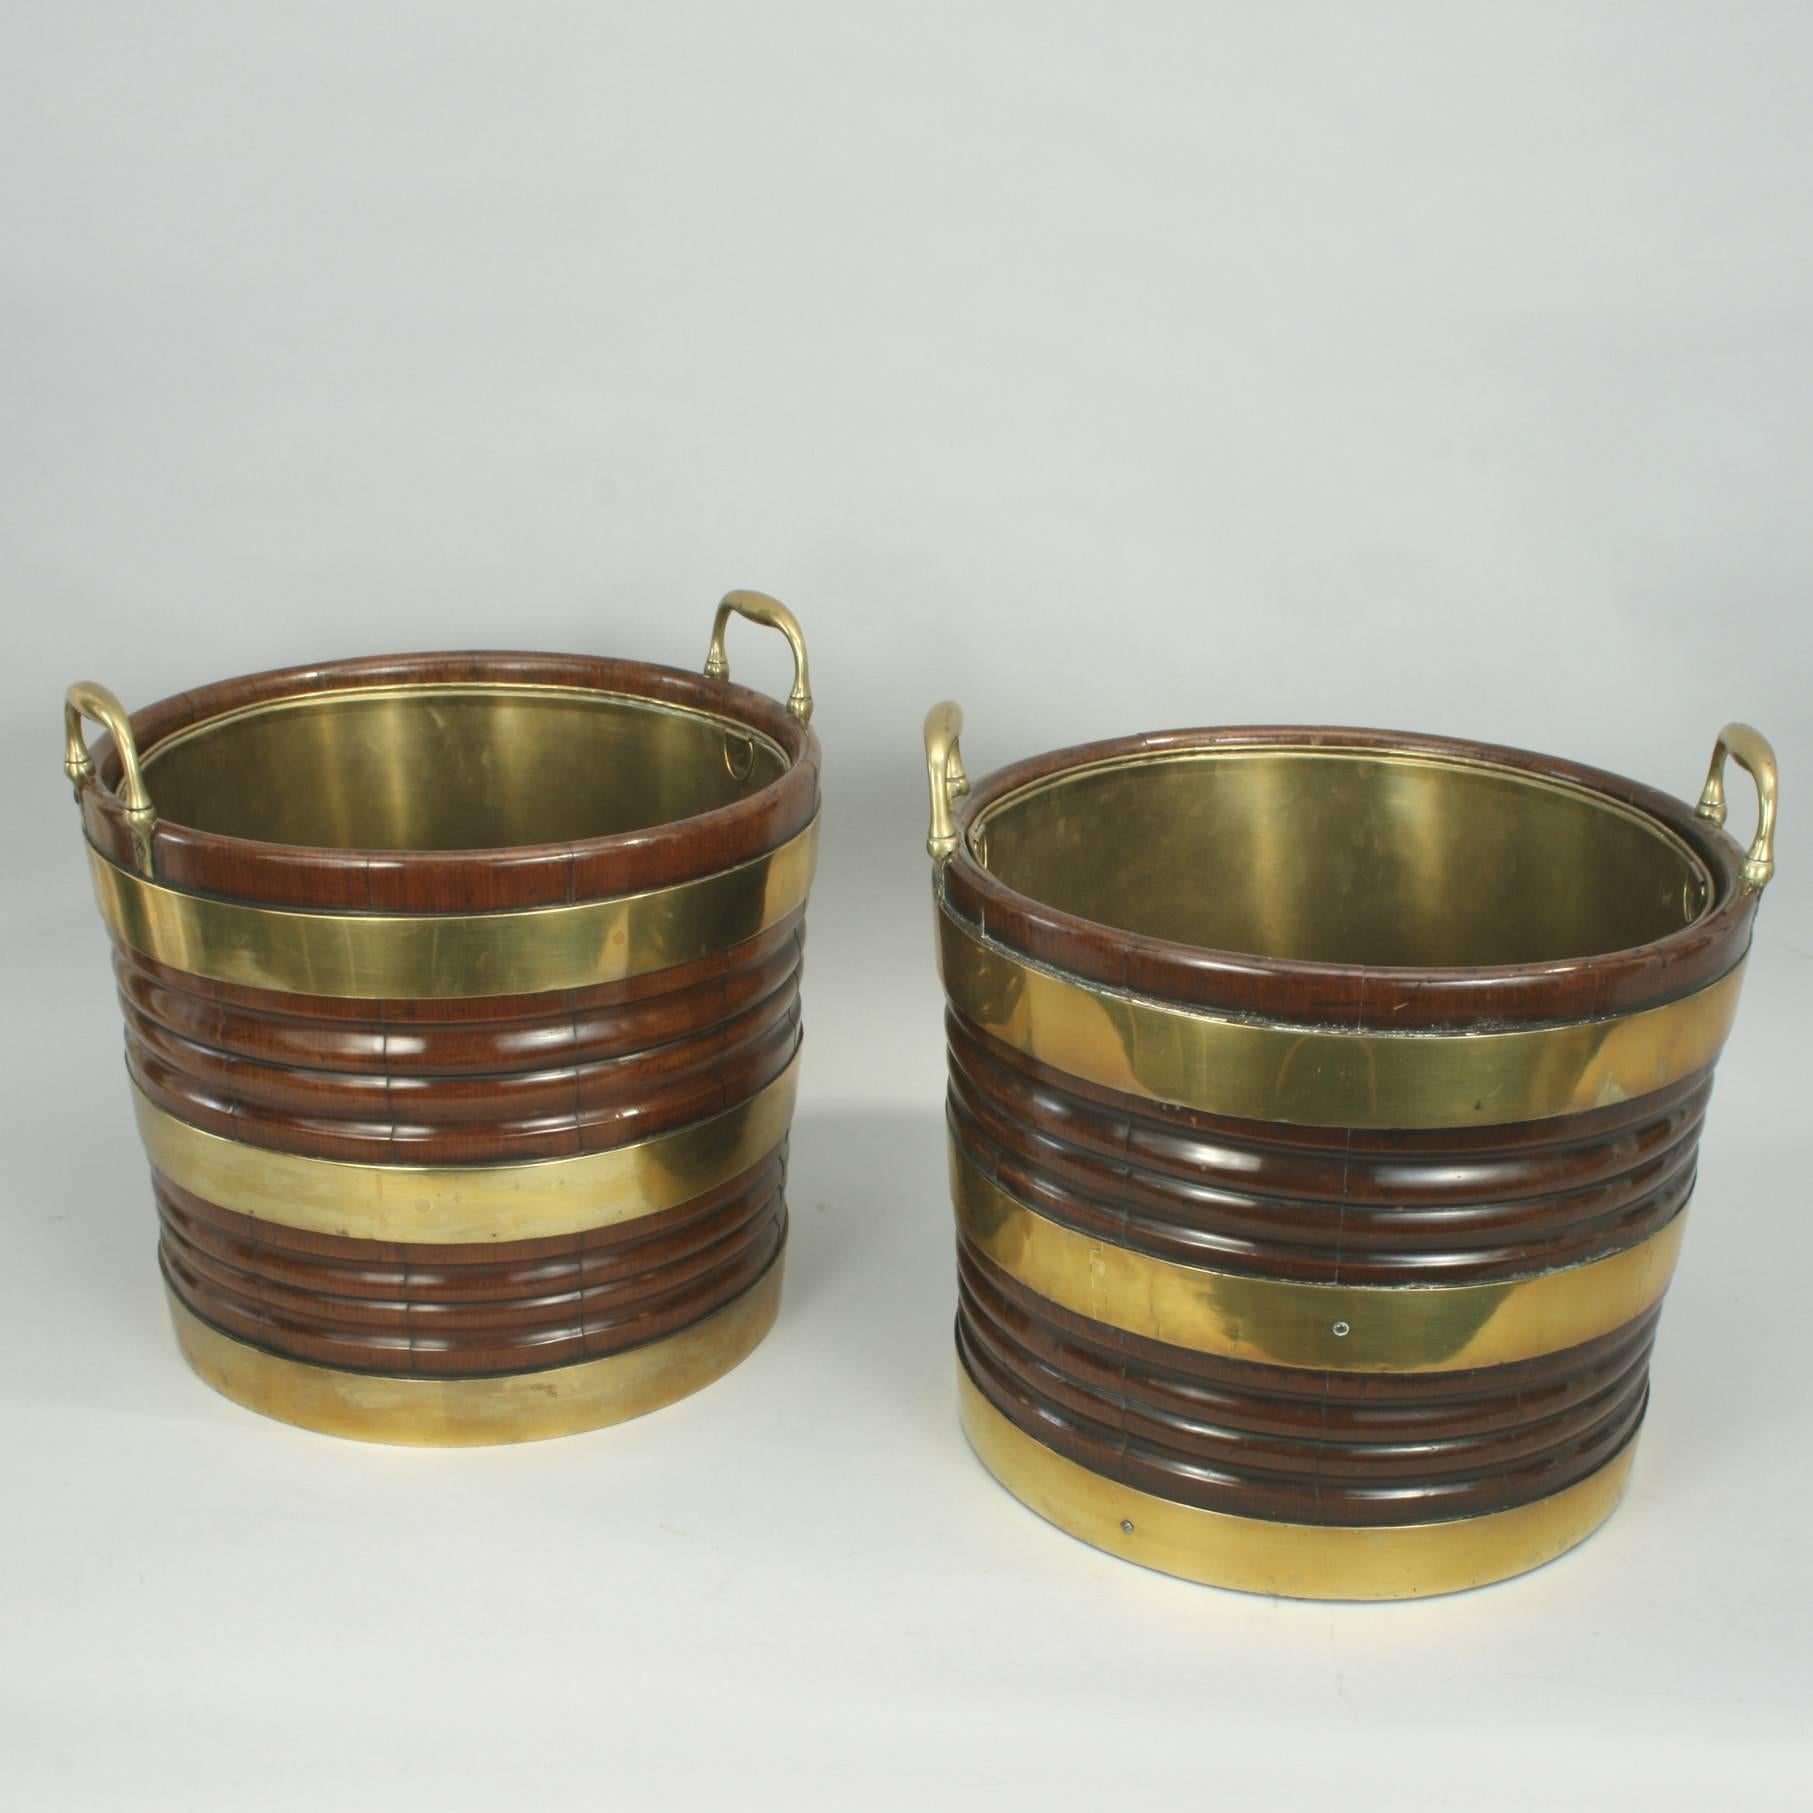 Fine Pair of Irish Peat Buckets in Mahogany and Brass In Good Condition For Sale In Oxfordshire, GB